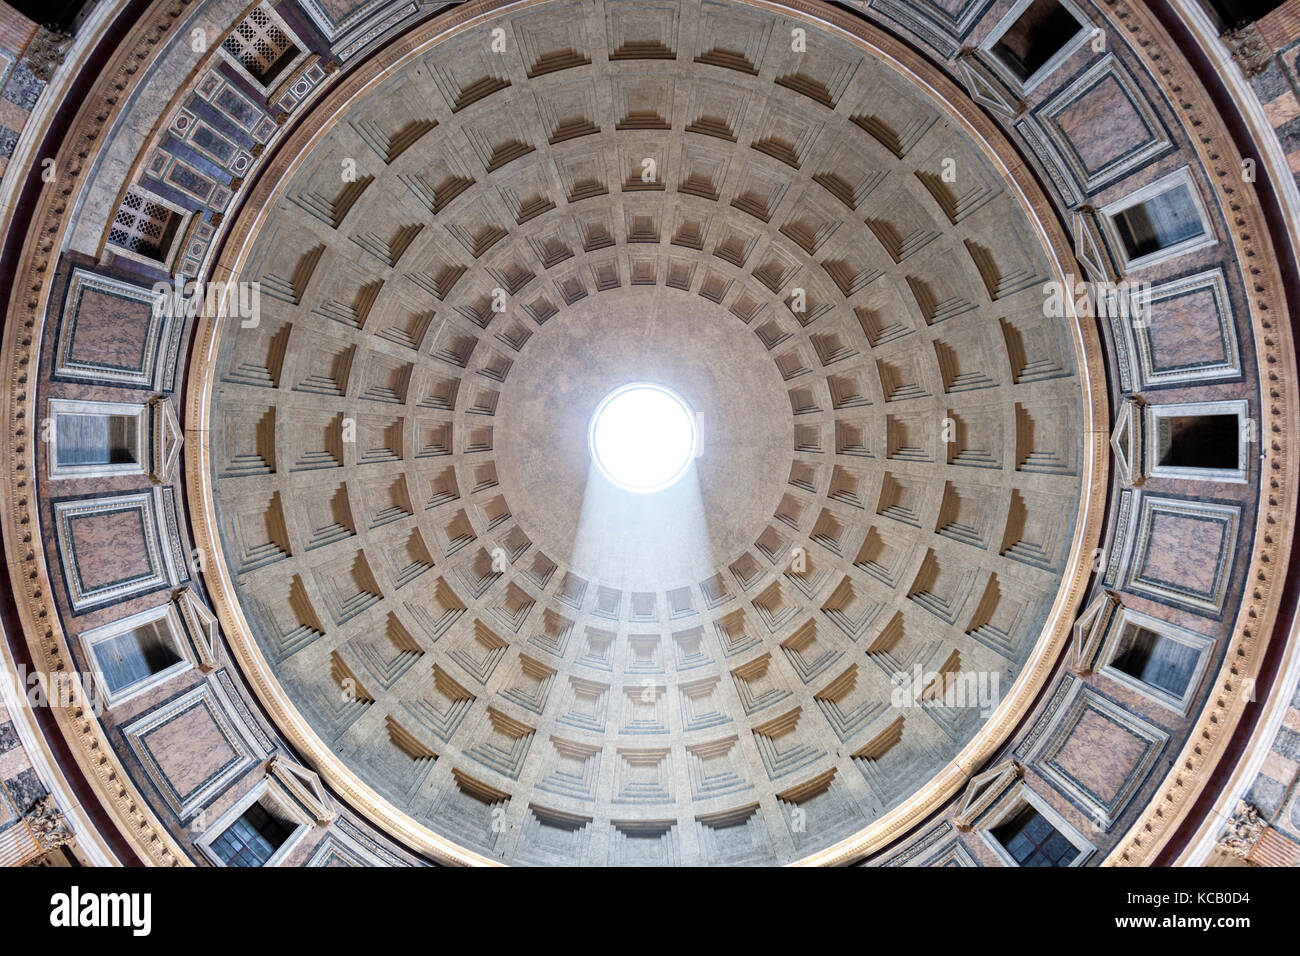 Sunlight streaming through the opening in the dome of the Pantheon in Rome. Stock Photo